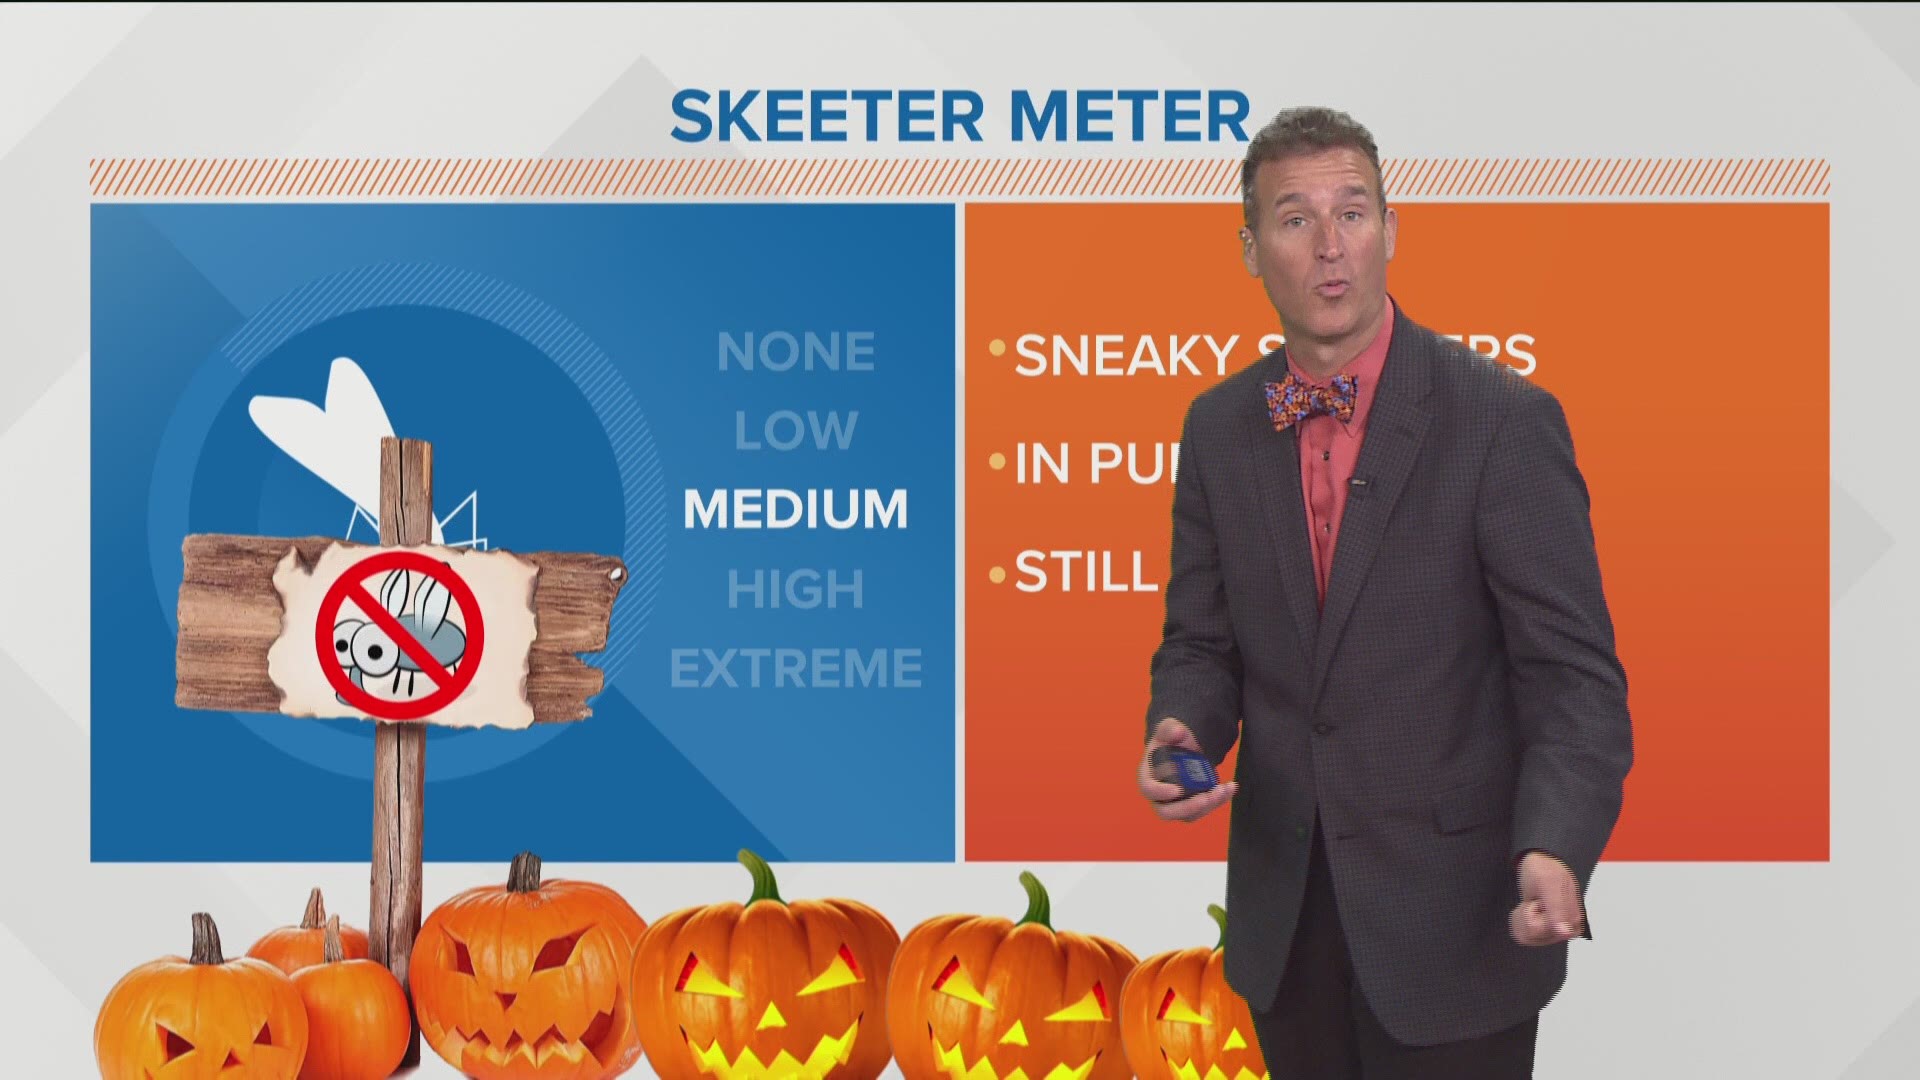 Be careful of sneaky skeeters at the pumpkin patch.